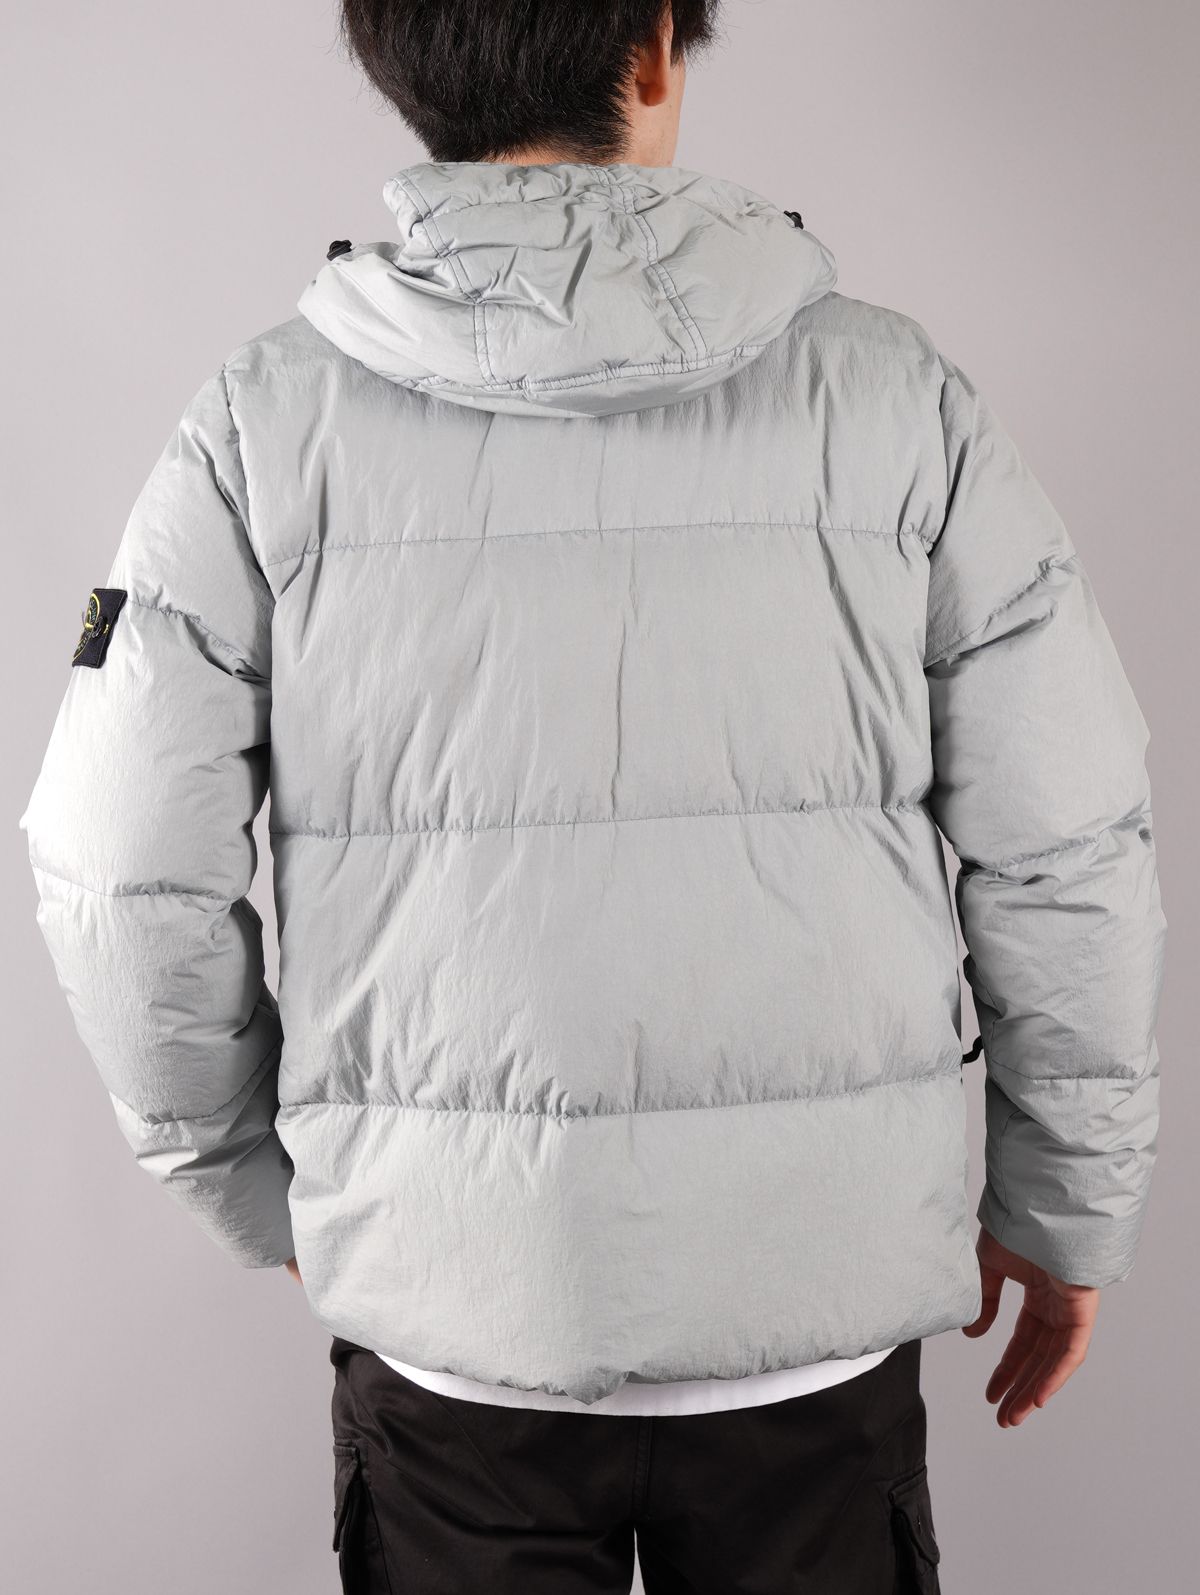 STONE ISLAND / 21aw / 1st delivery | Confidence